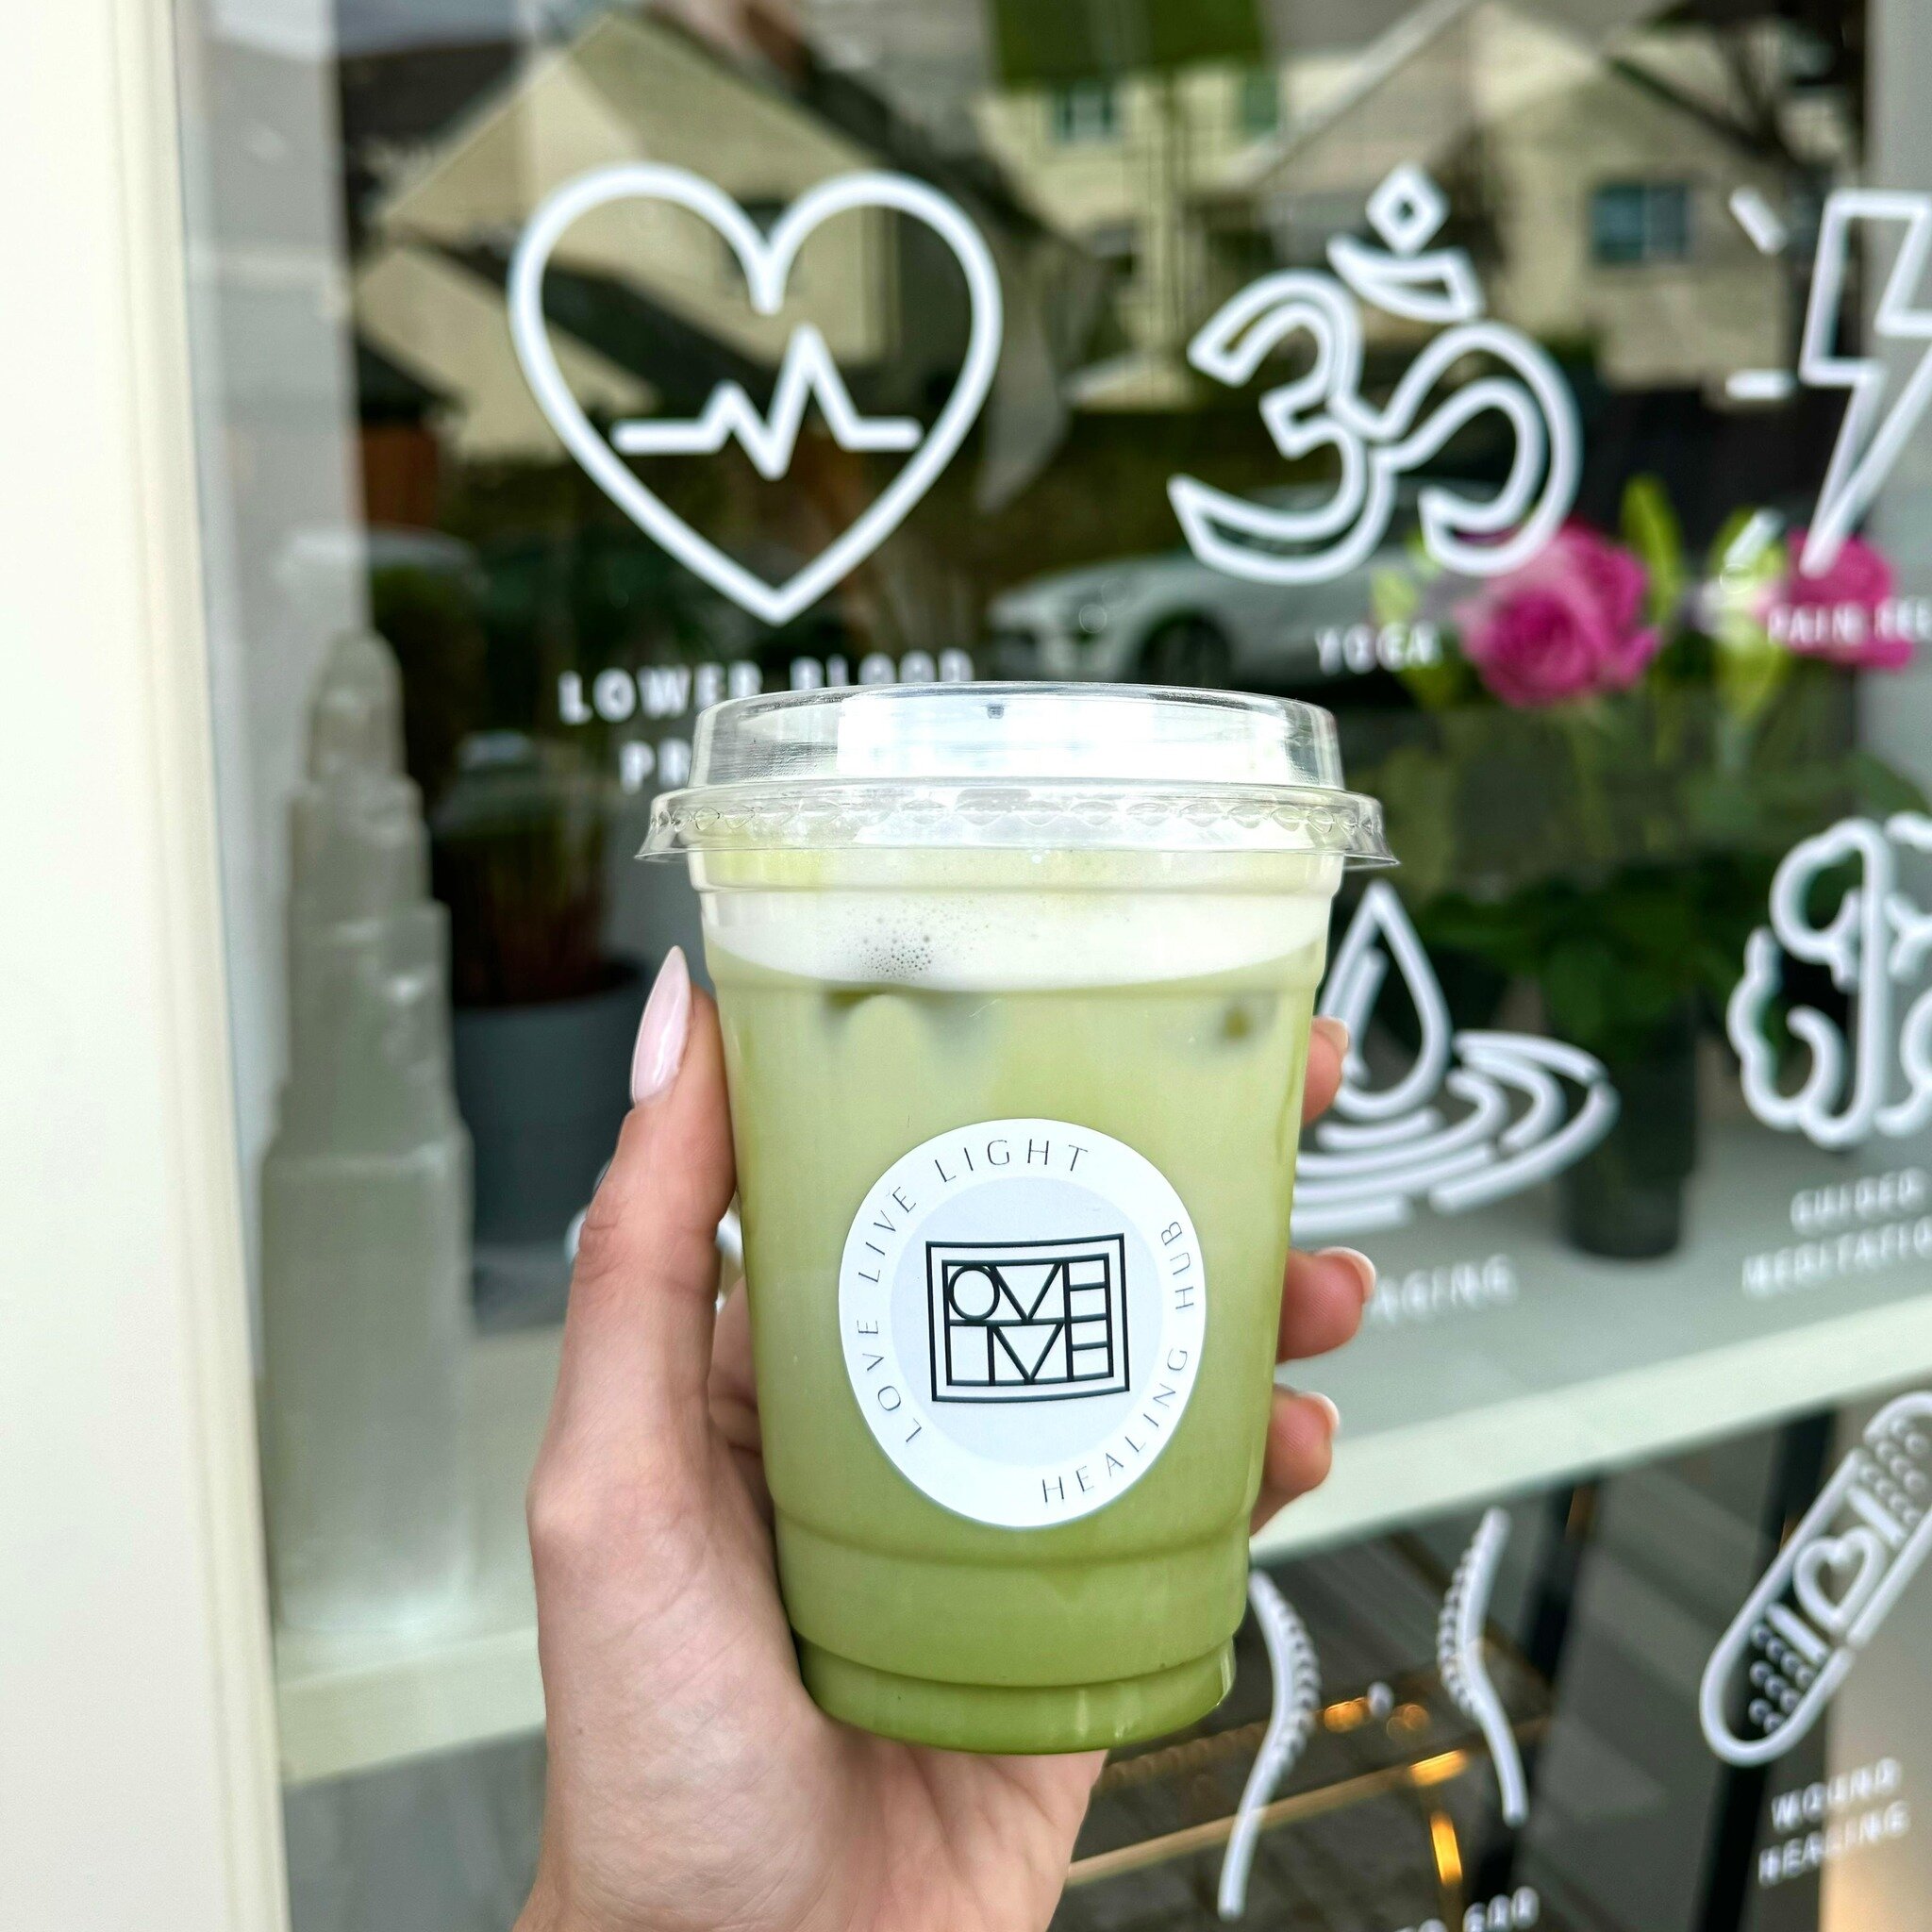 Our iced ceremonial matcha latte is the perfect sunshine go to. Packed full of antioxidants and paired with organic gluten free oat, coconut or almond milk 😍✨🍵💞

Open until 4pm all weekend 🌞

#pontcannahealinghub #wellnesscommunity #matcha #match